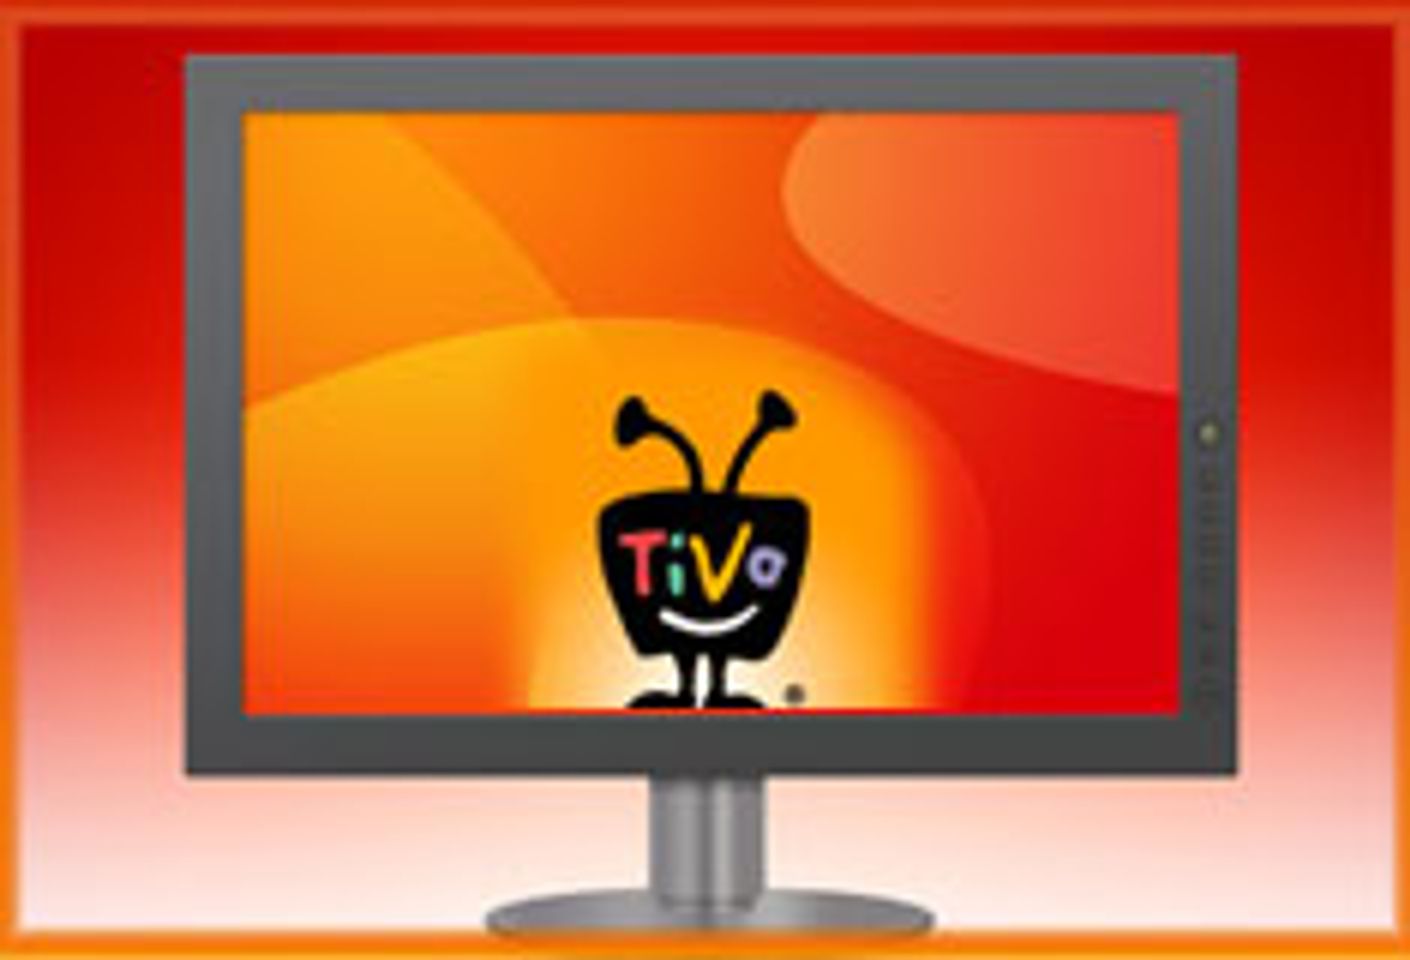 TiVo Brings On-Demand Video Home